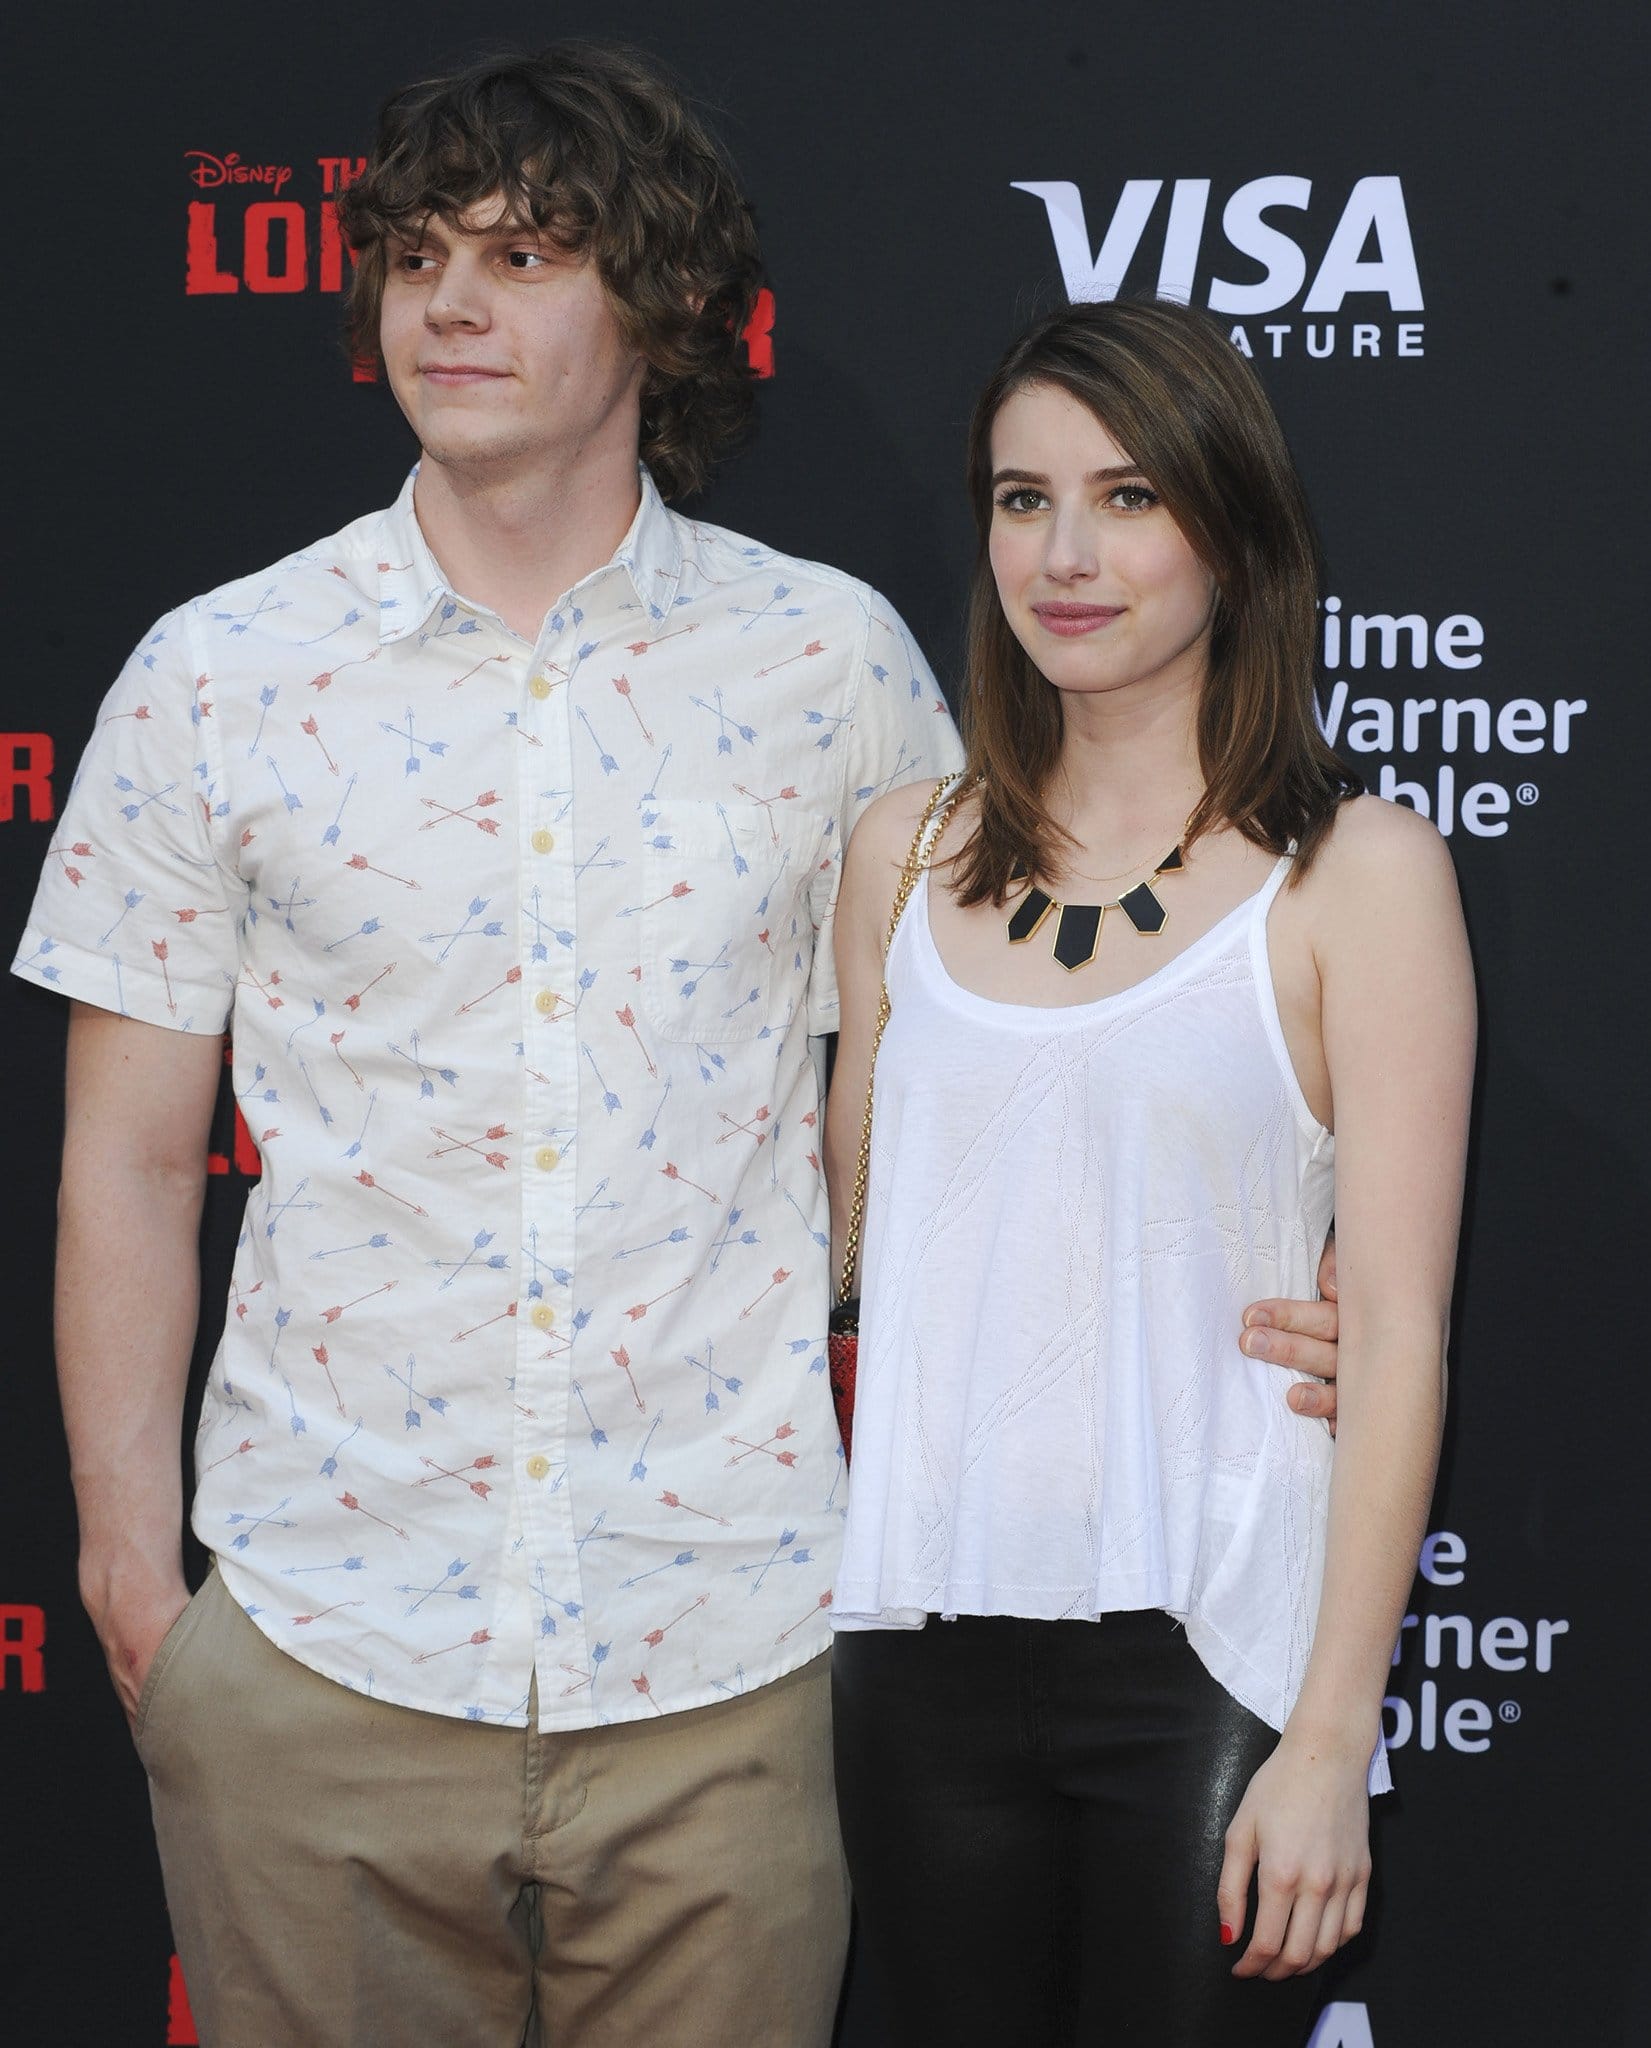 Evan Peters and Emma Roberts started dating in 2012 and a year later, the actress got arrested for domestic violence